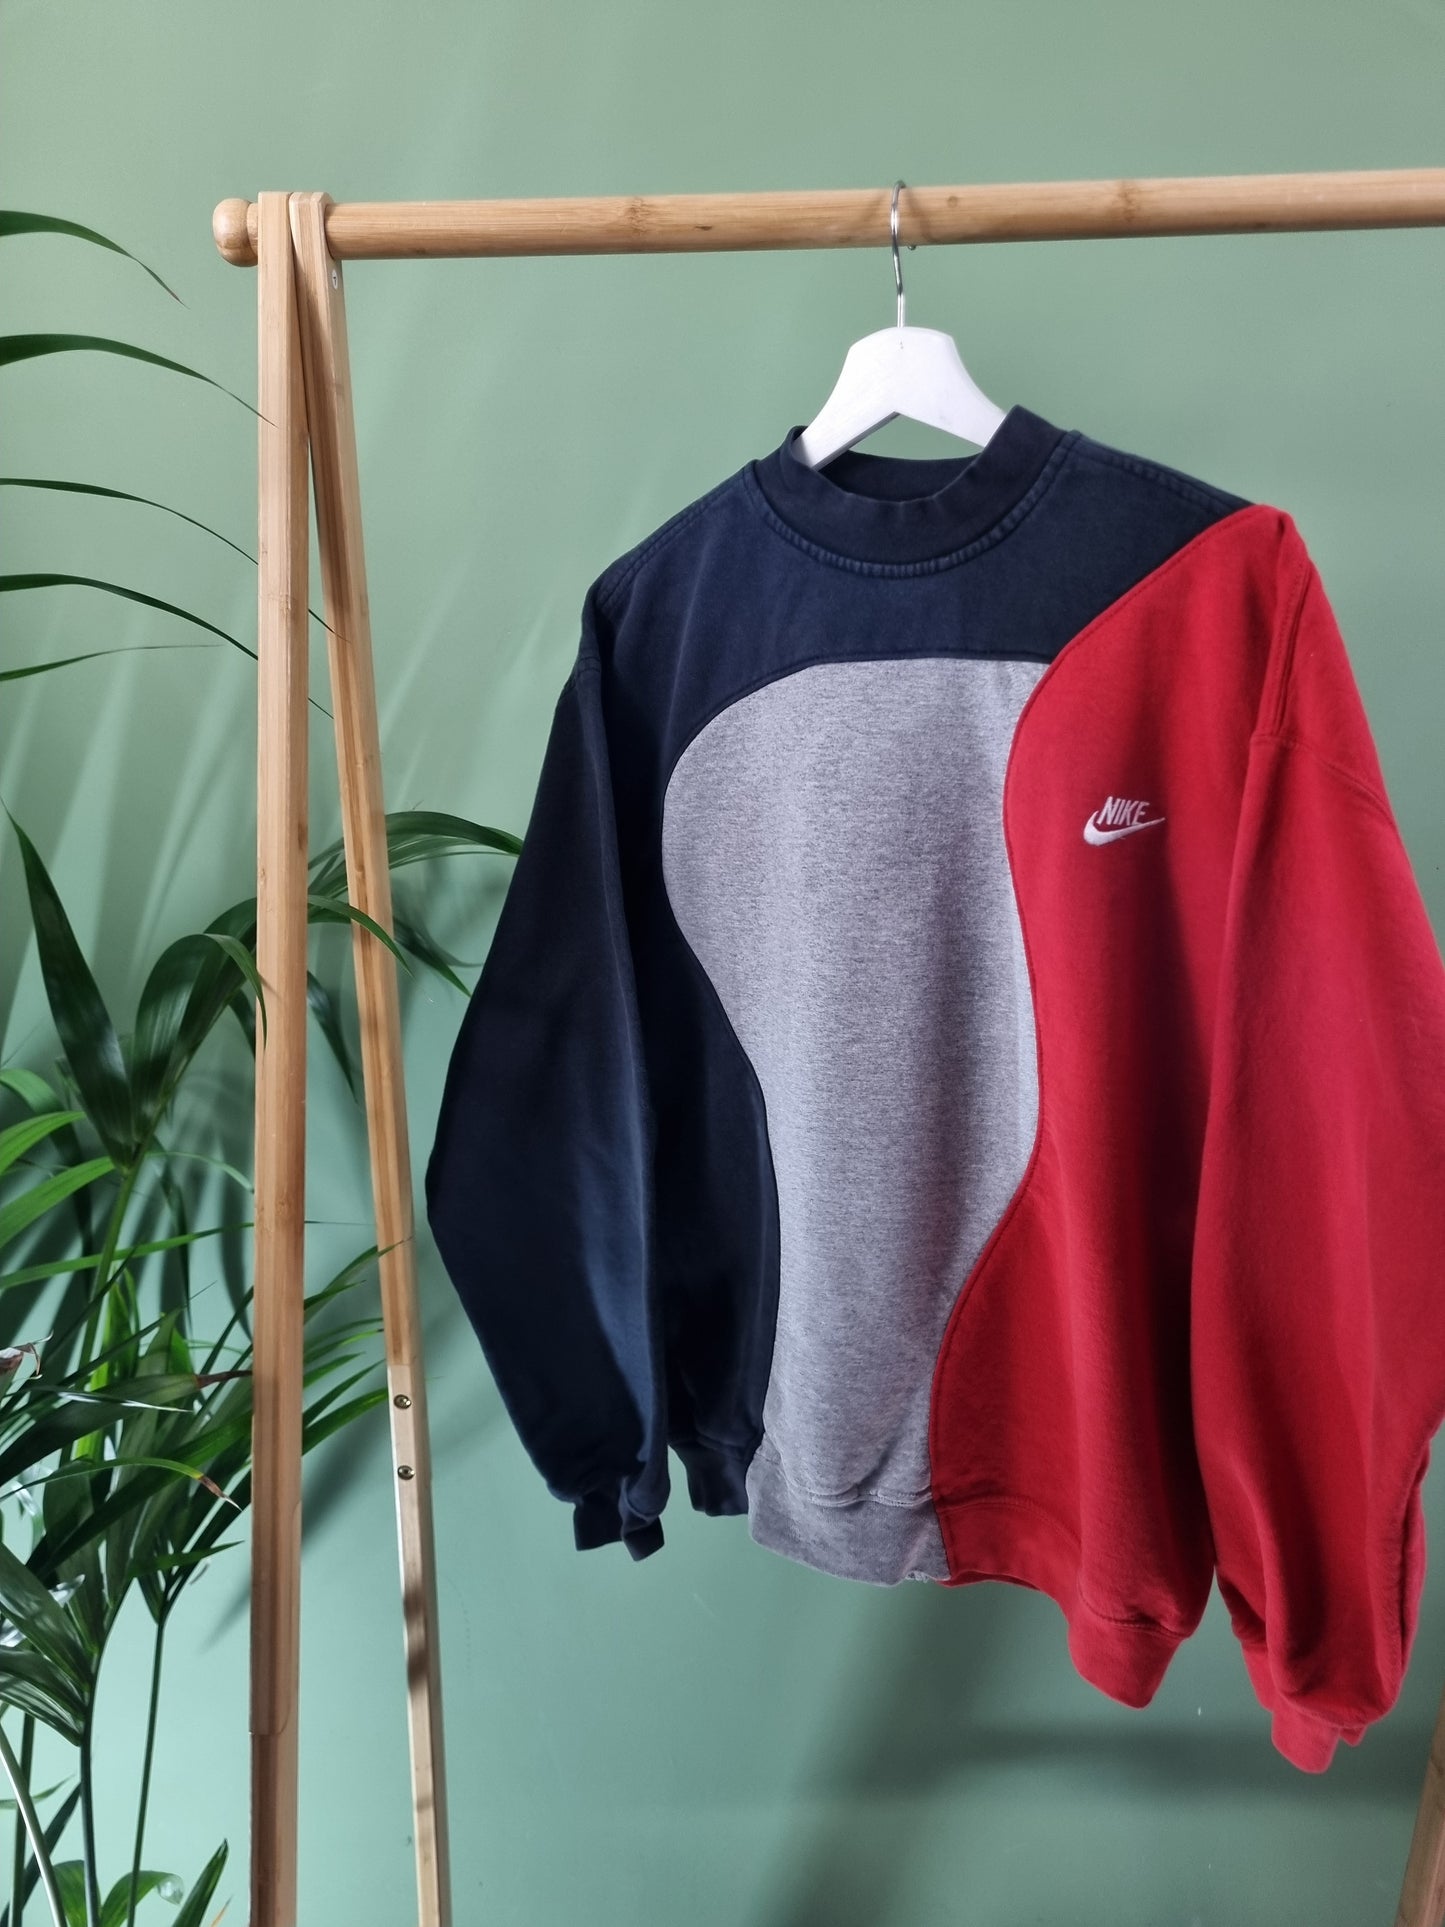 Nike chest logo reworked sweater maat M